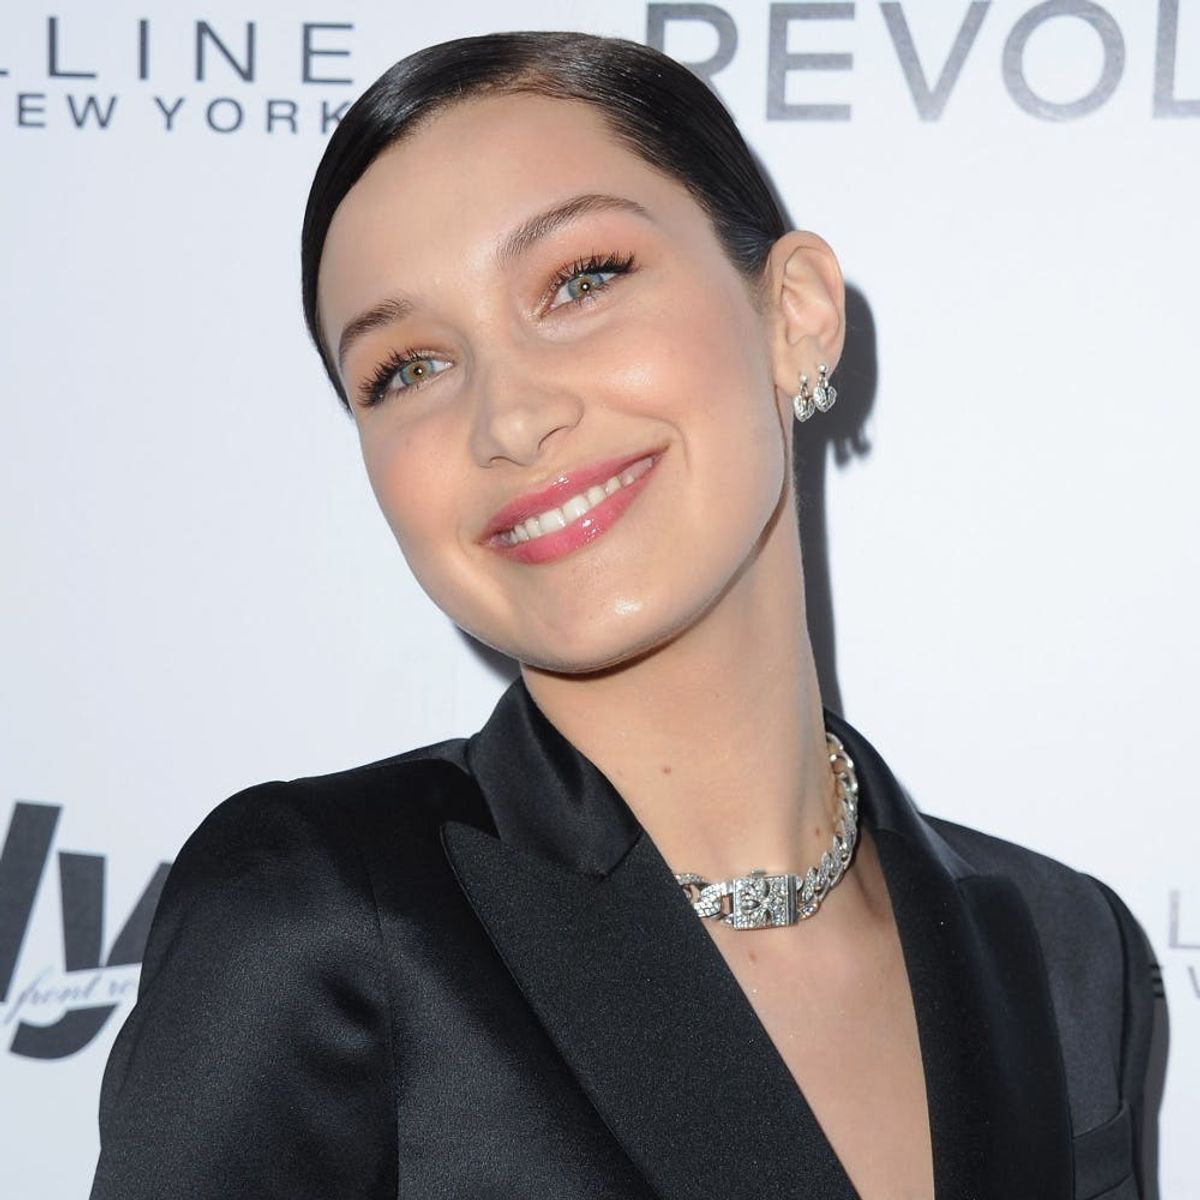 Bella Hadid Revealed Her Diet and It’s Not AT ALL What You’d Expect